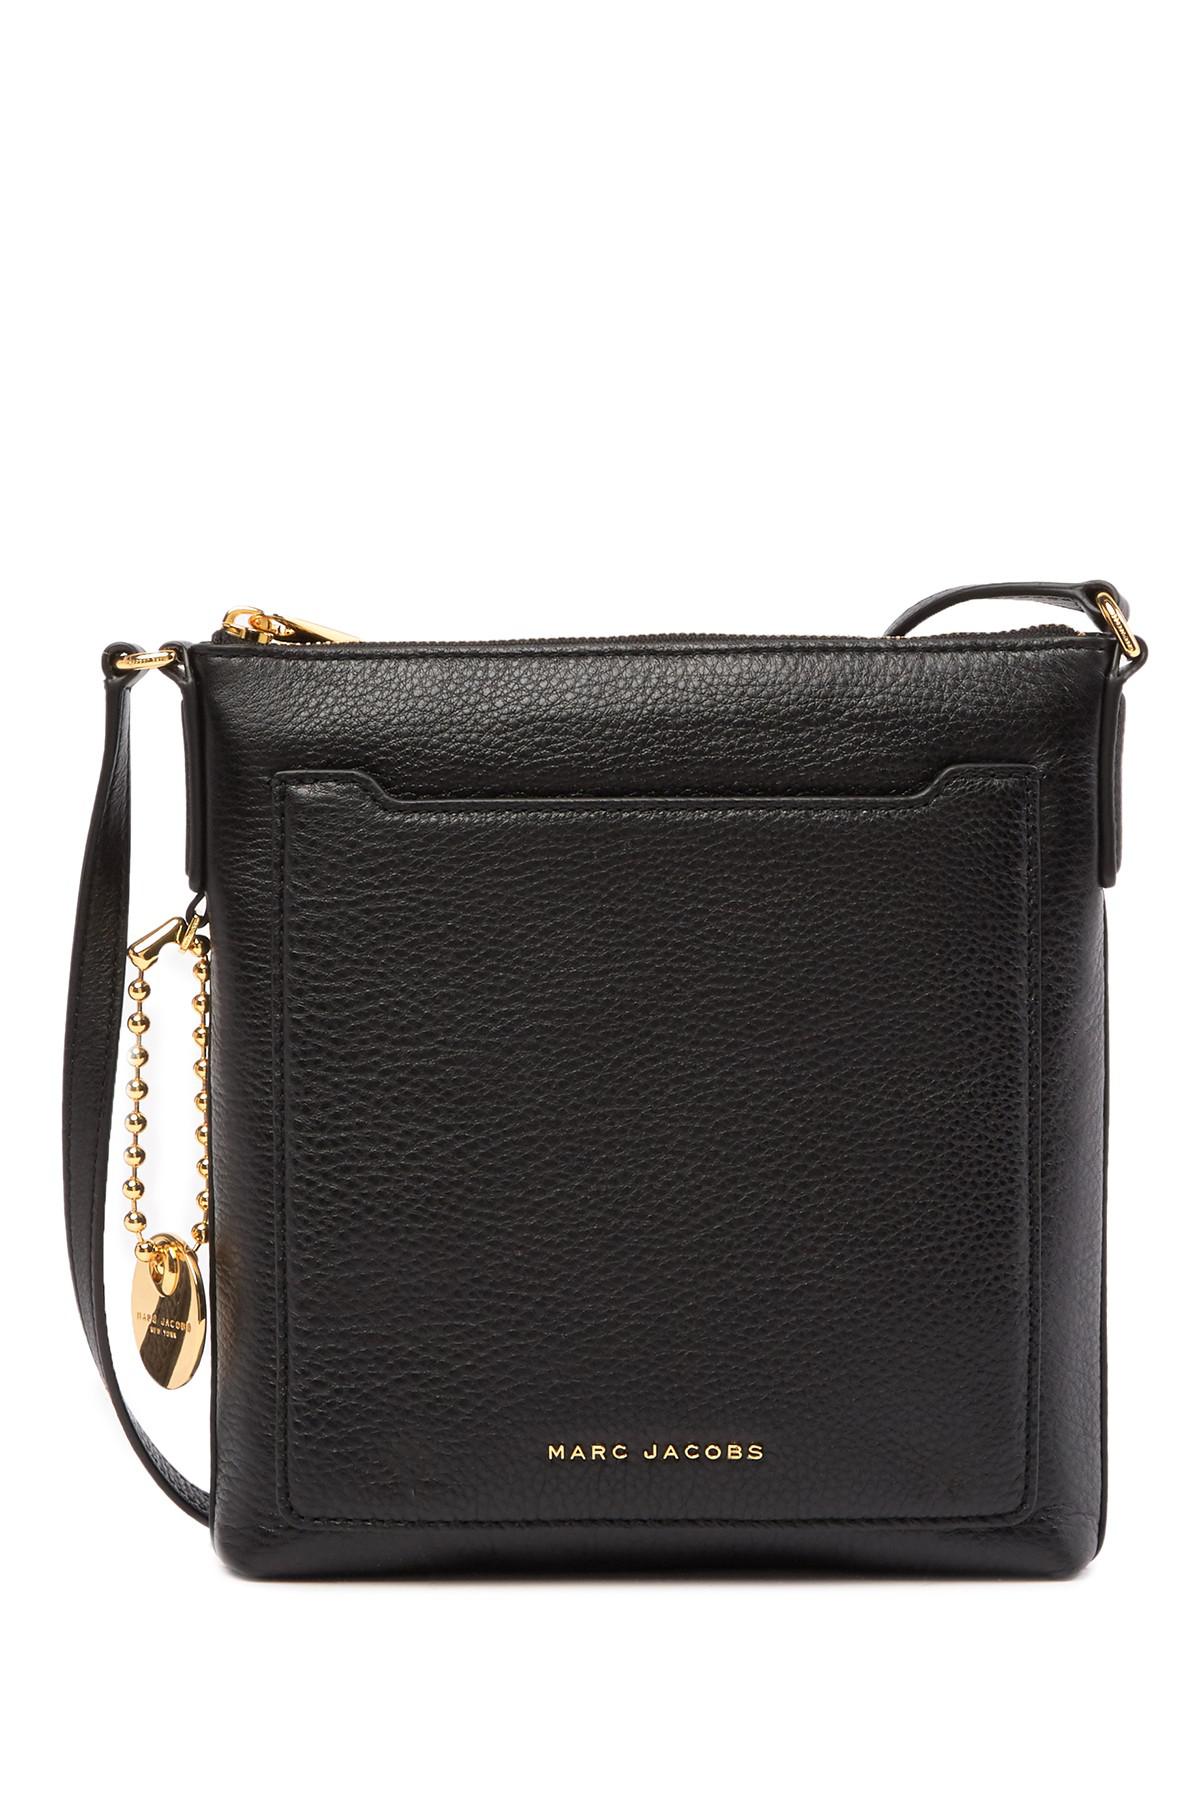 Marc Jacobs Tourist Ns Leather Crossbody Bag in Black | Lyst